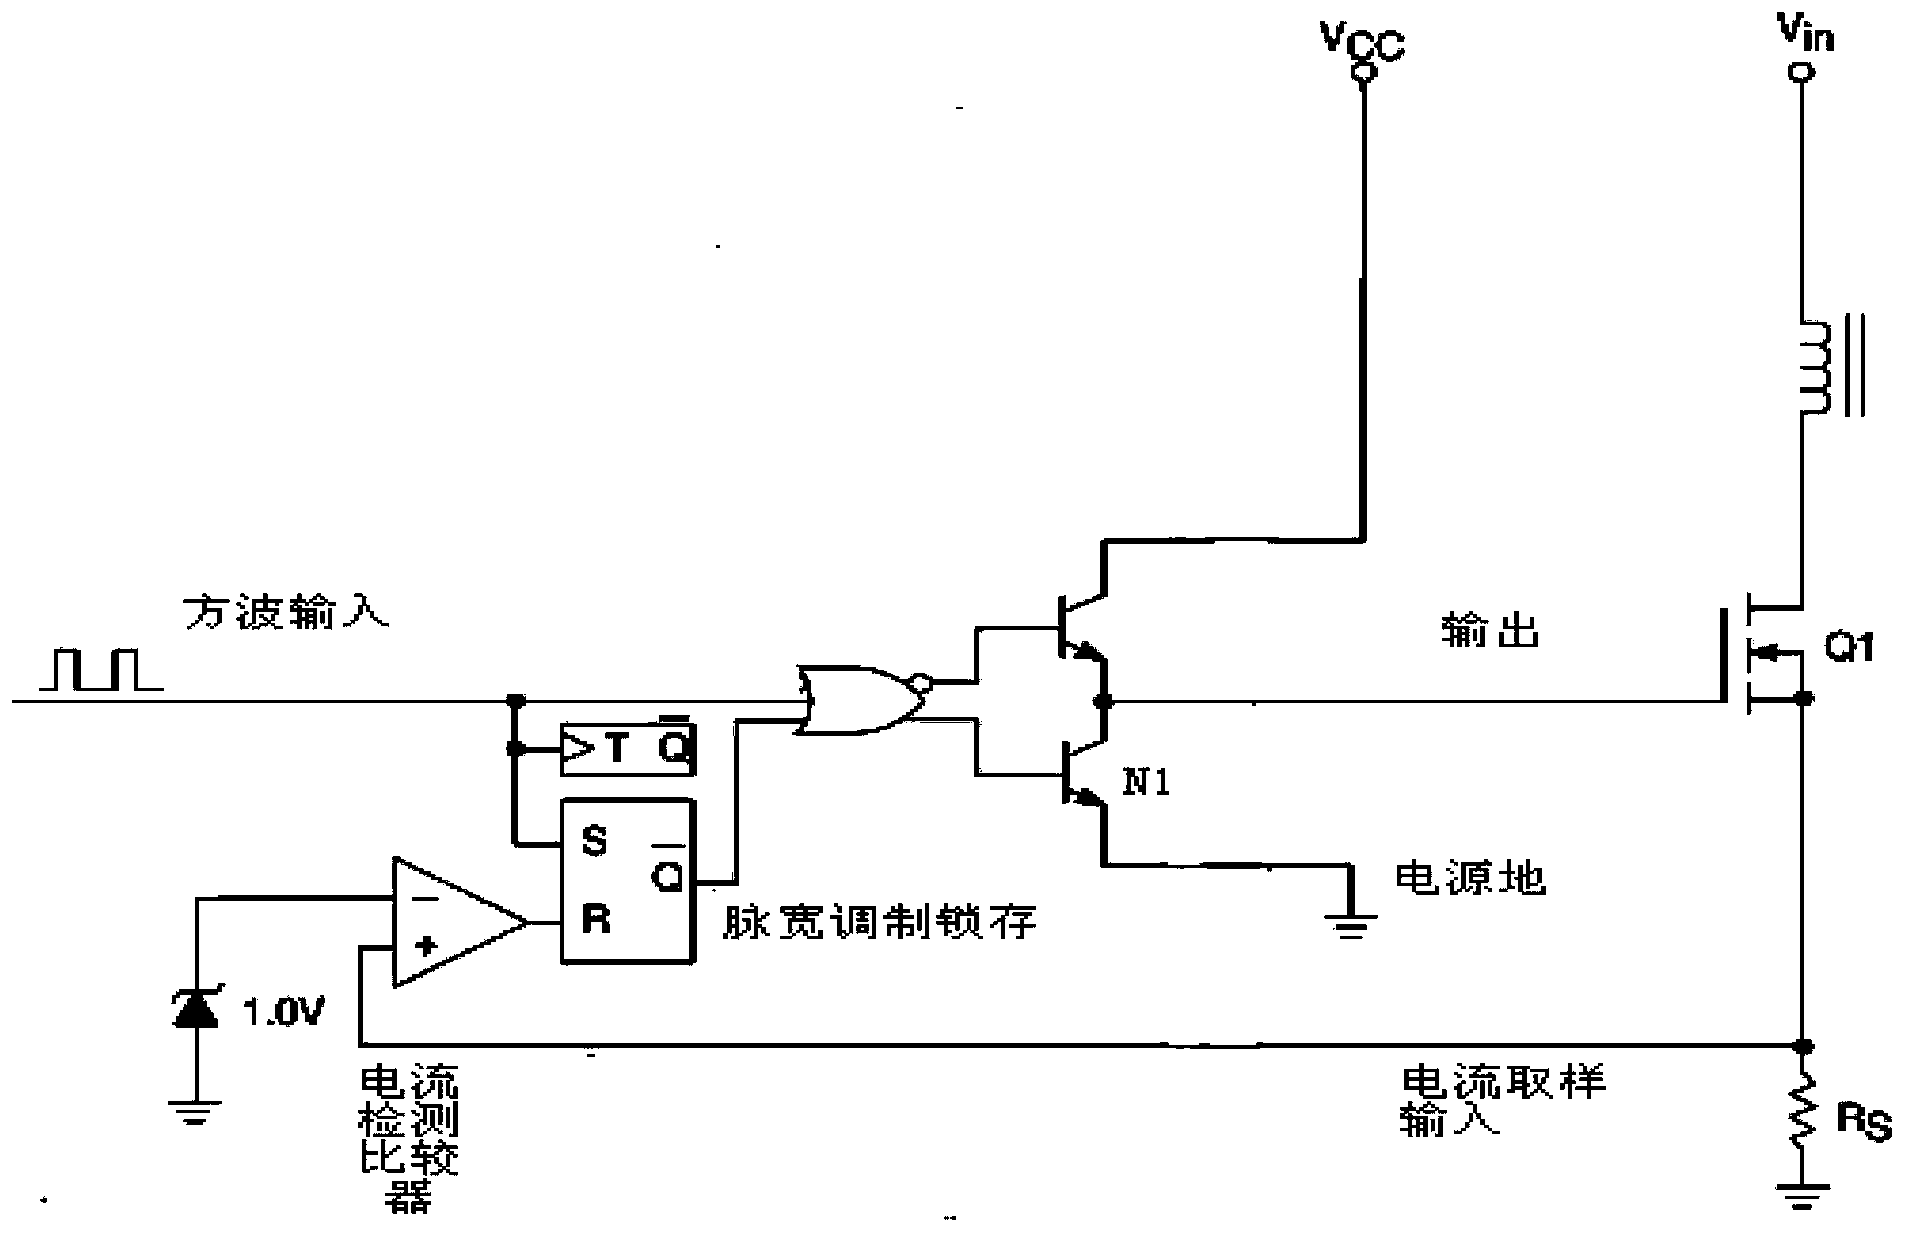 Current monitoring circuit with accurate current-limit function